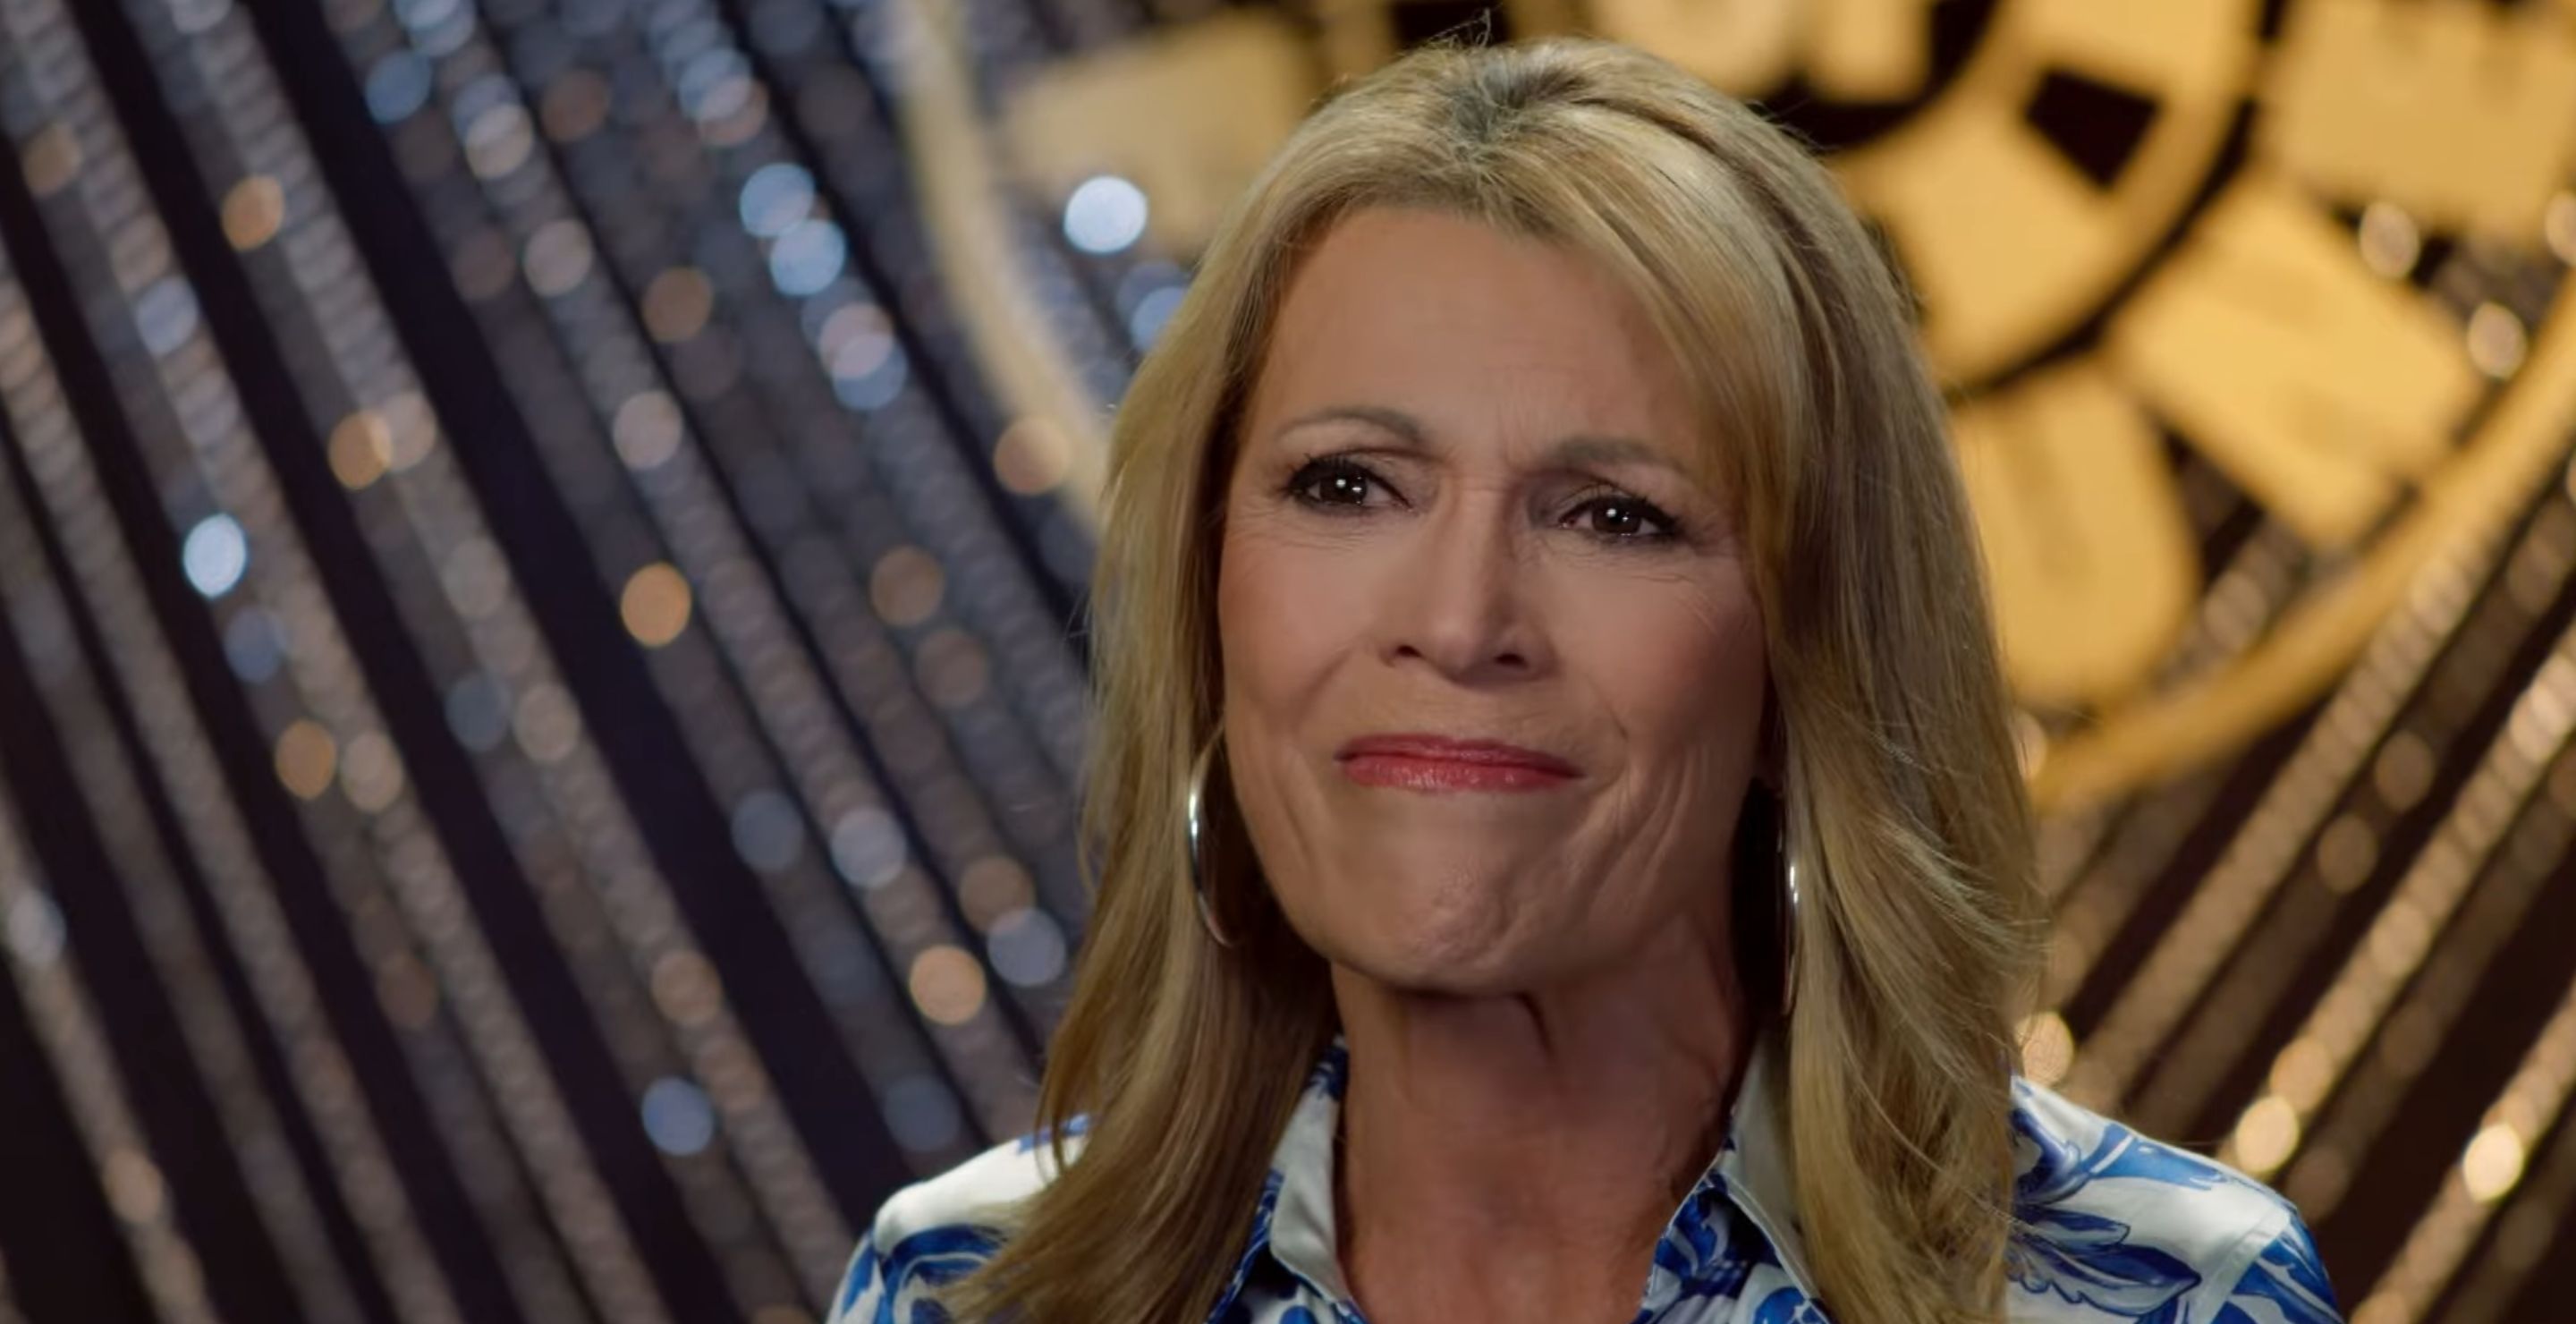 Vanna White Gives Emotional Farewell To Pat Sajak After Over 40 Years Together On 'Wheel Of Fortune'